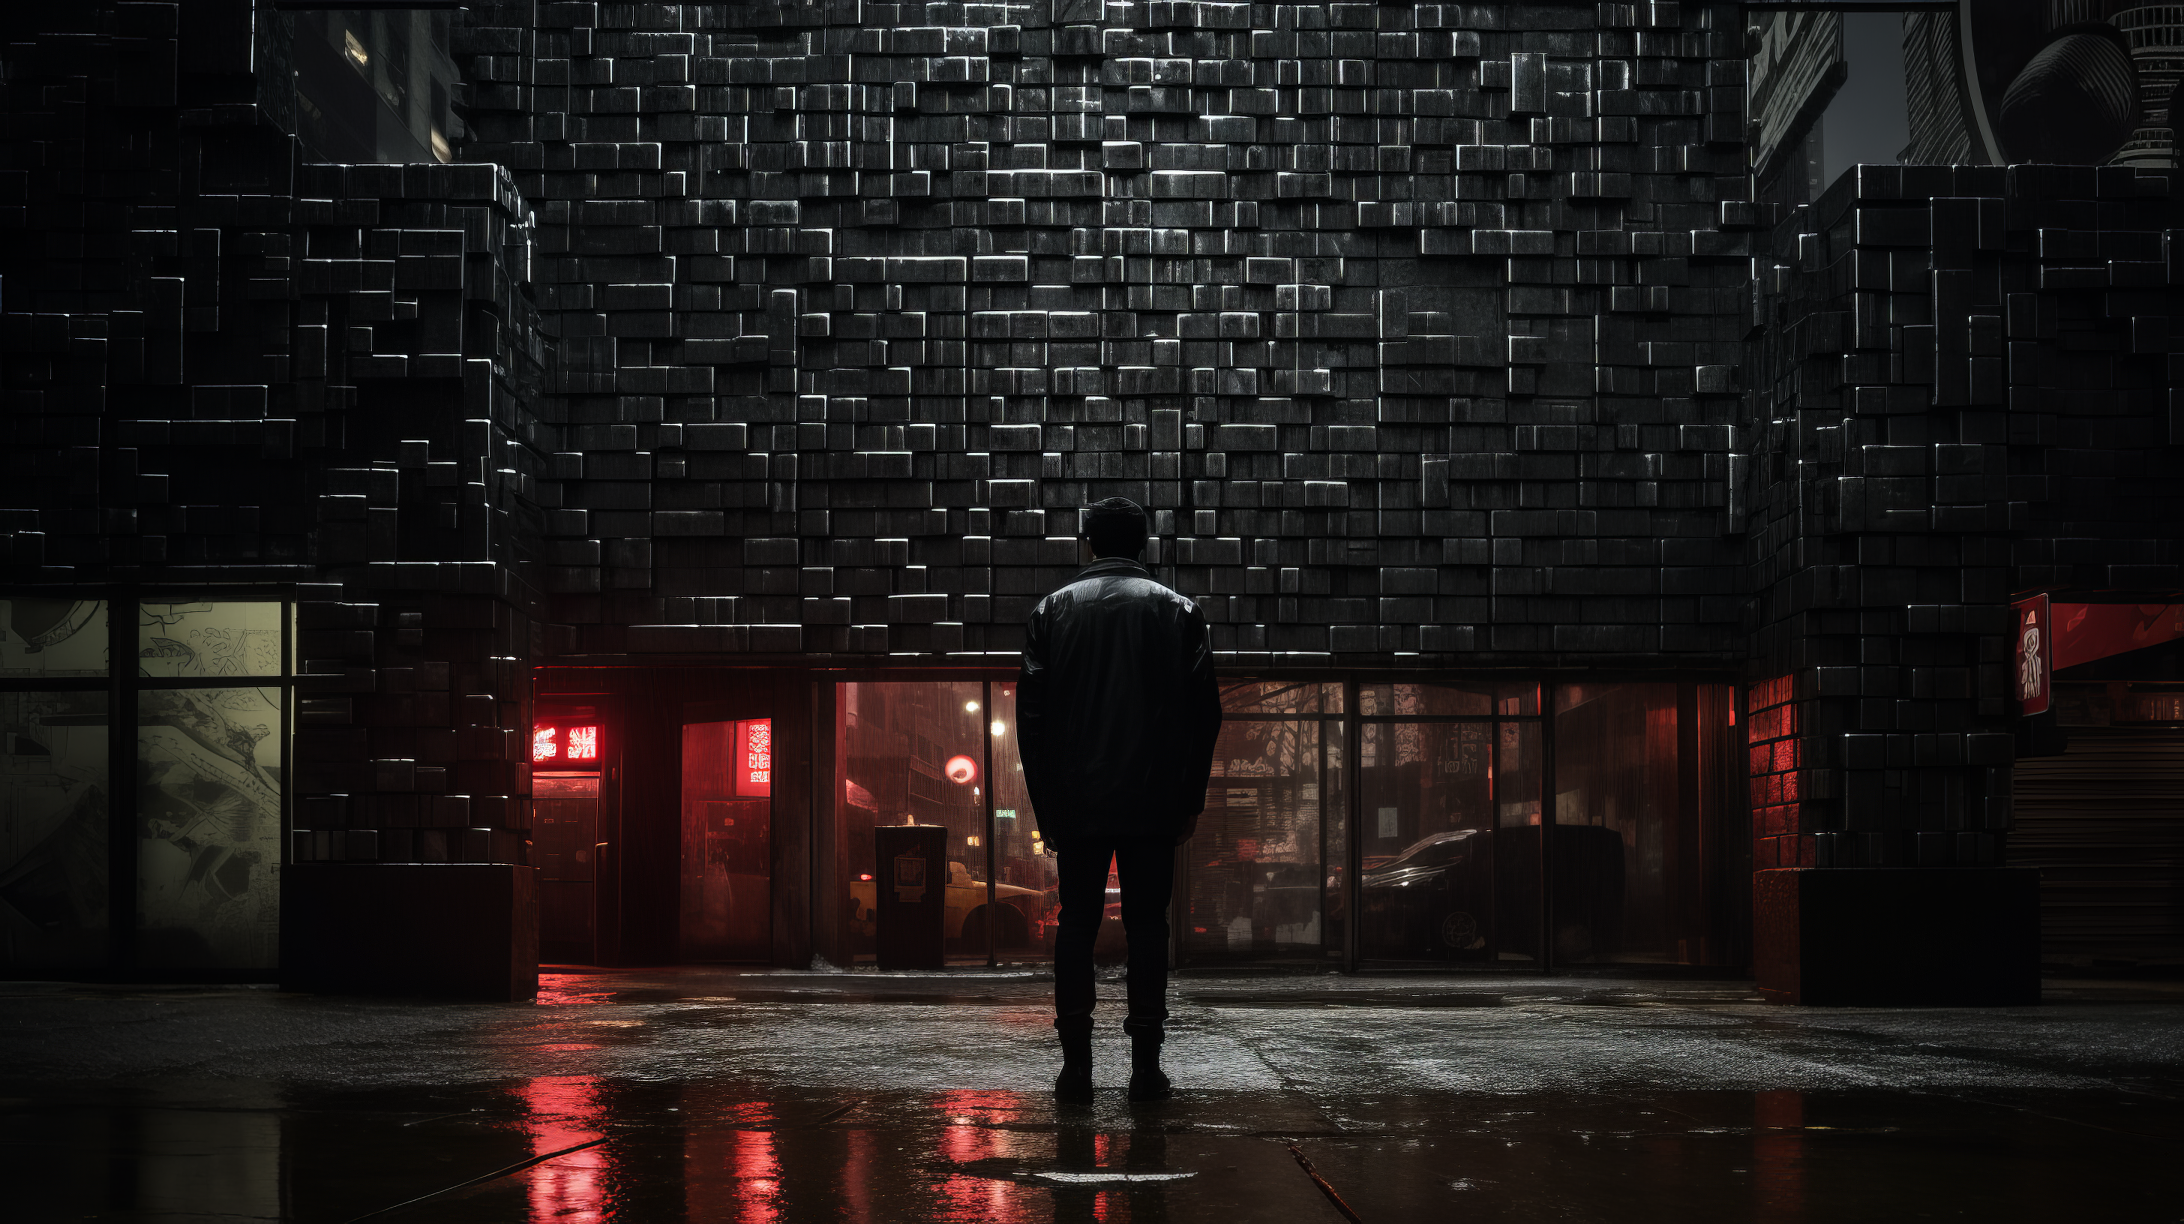 HD wallpaper of solitary figure in a dramatic, rain-soaked city street at night with glowing red lights